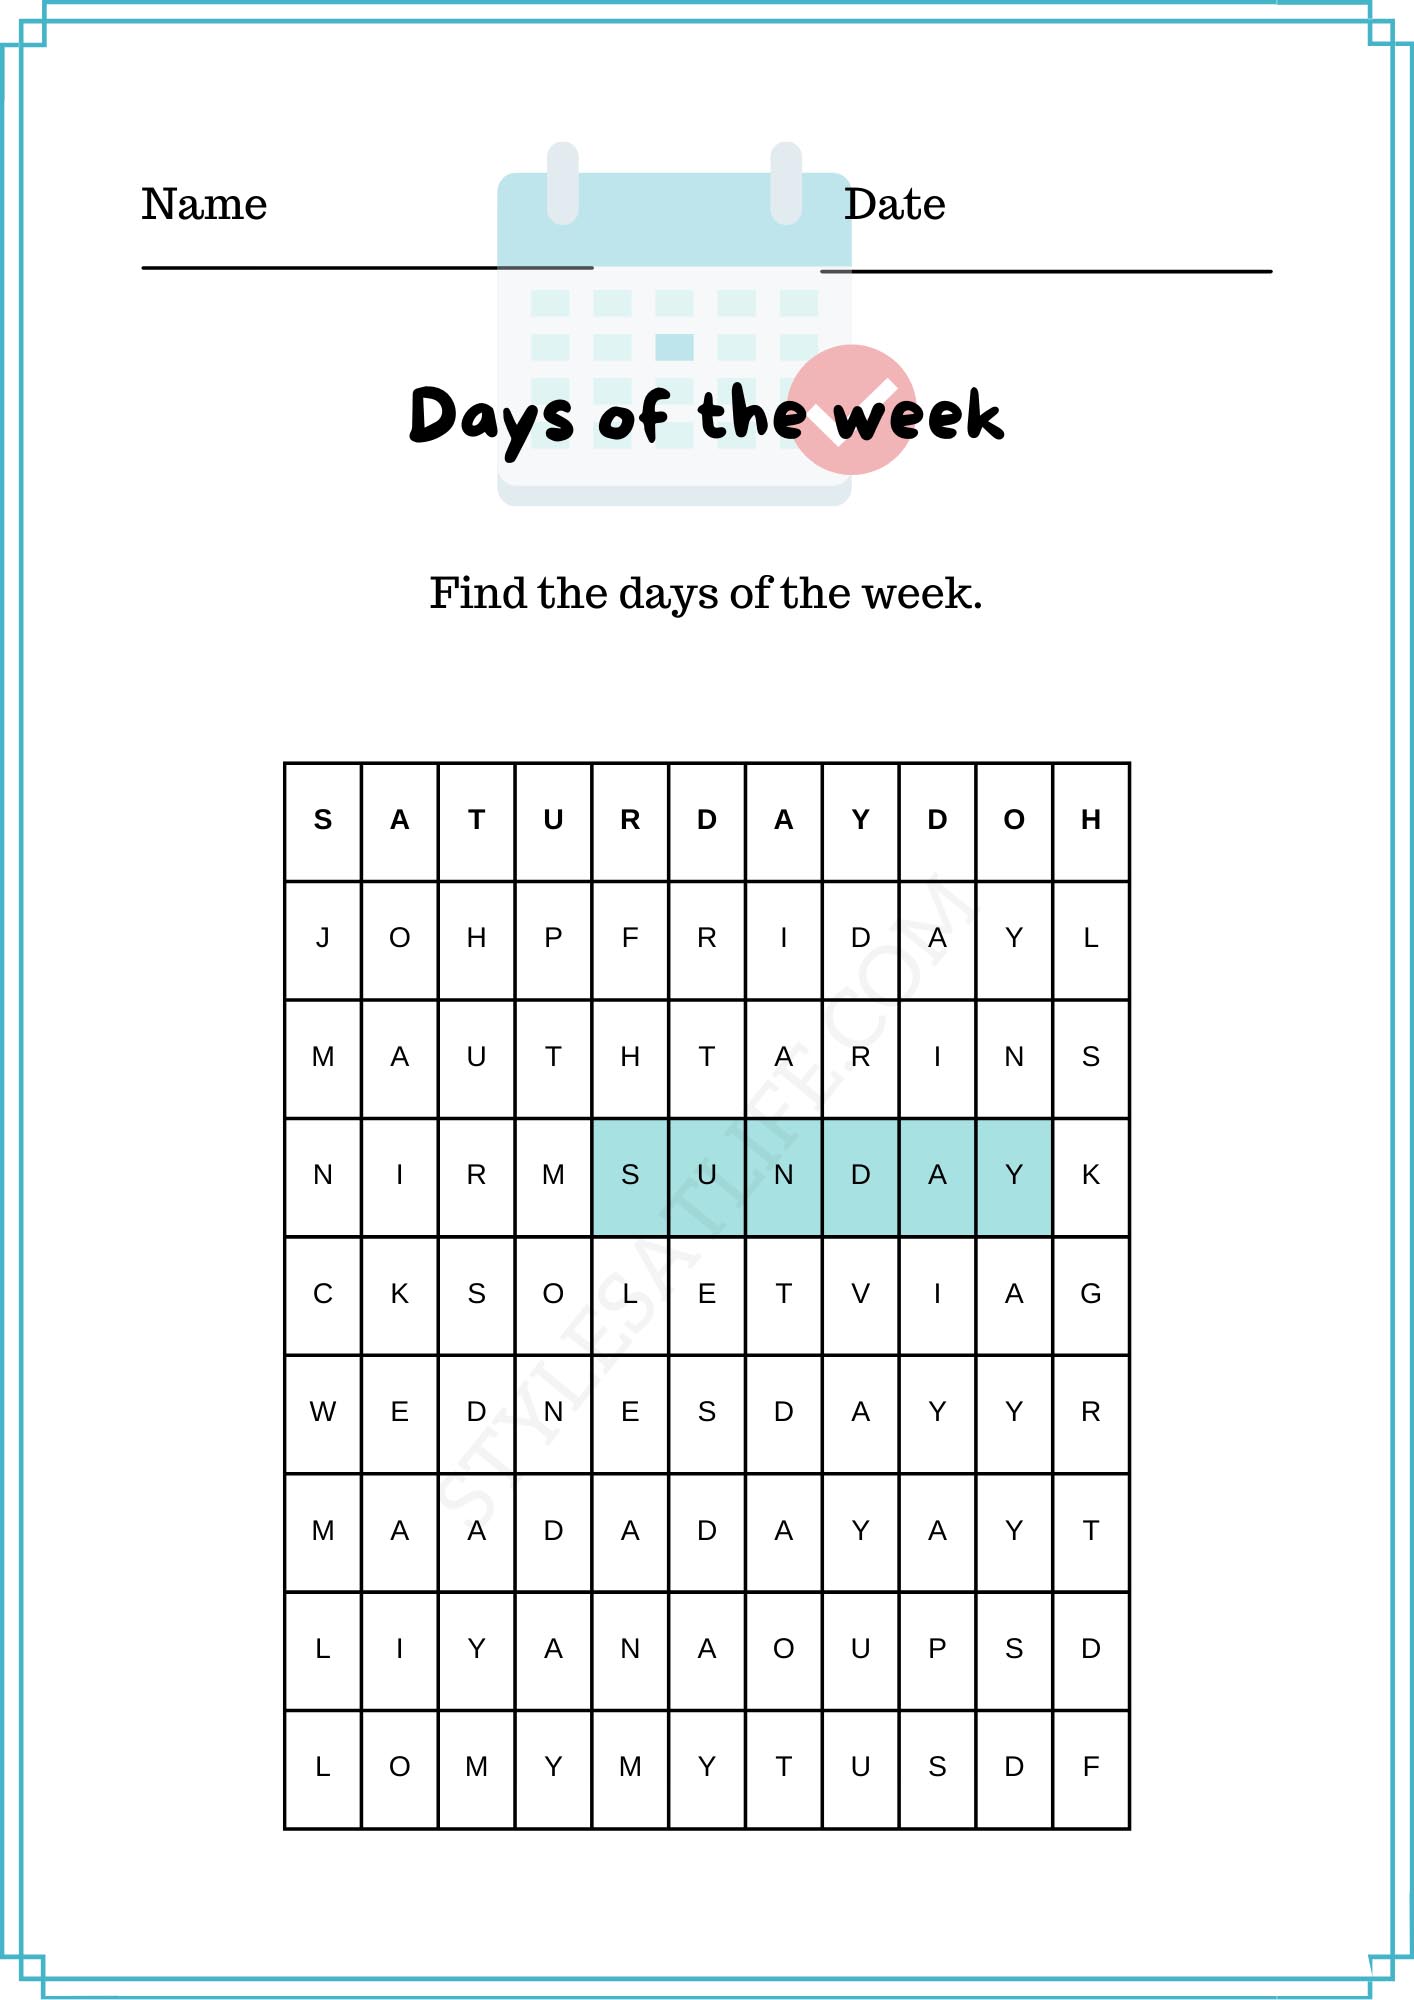 Days of the Week Word Search Puzzle